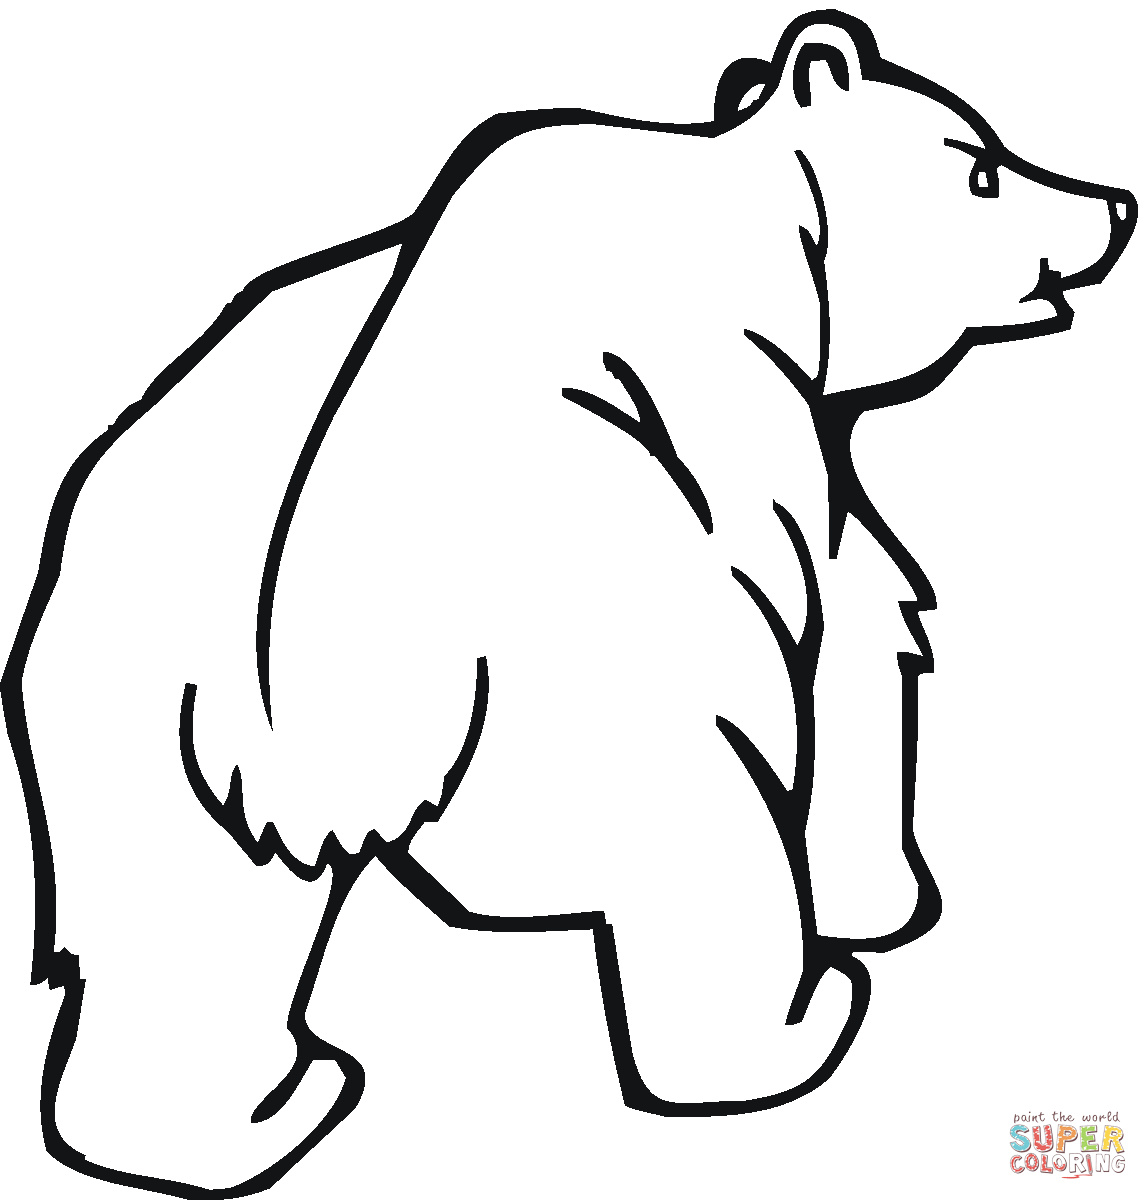 grizzly bear coloring pictures grizzly bear coloring page educationcom coloring grizzly bear pictures 